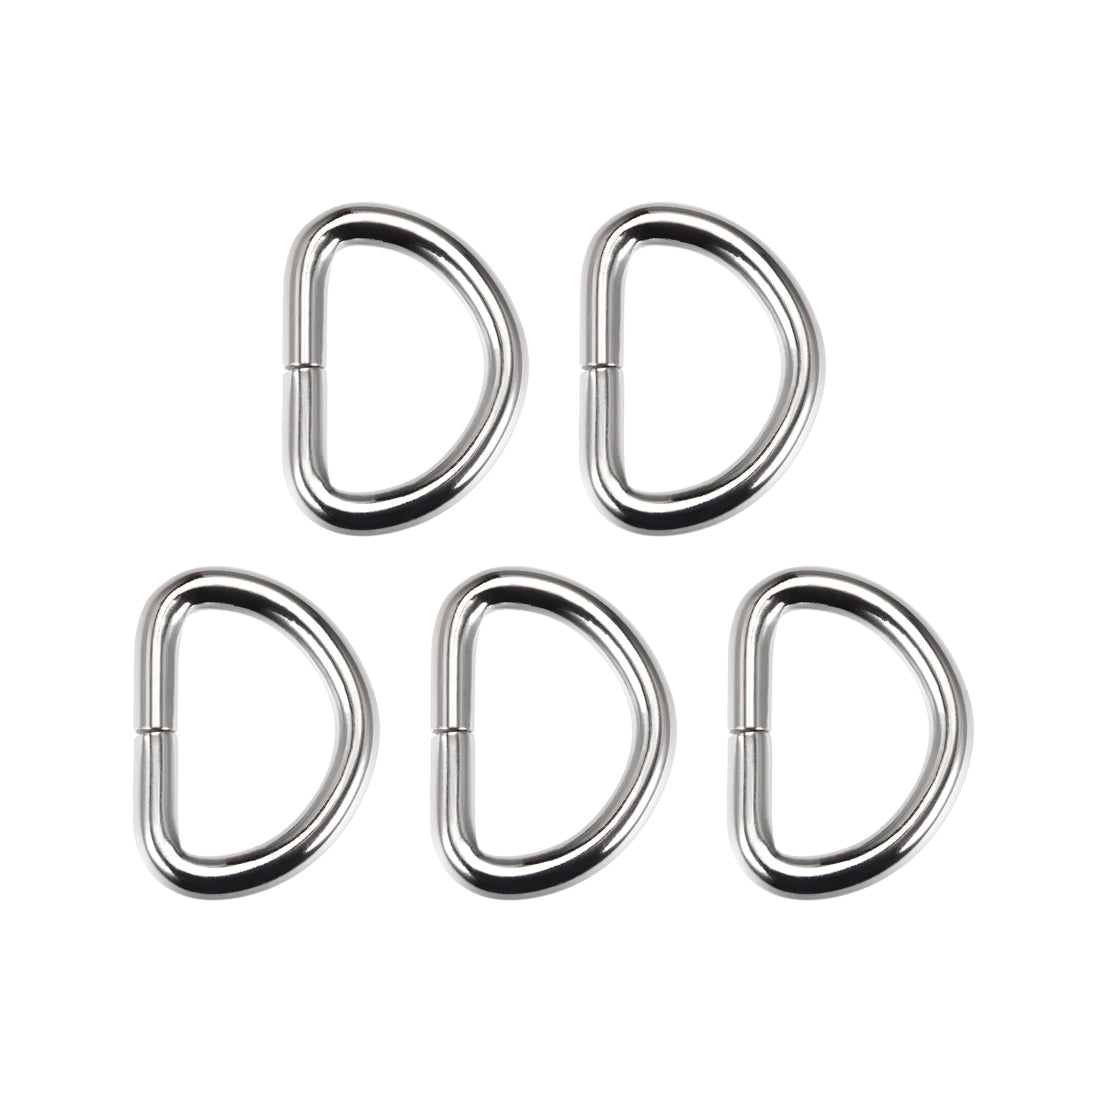 uxcell Uxcell 5 Pcs D Ring Buckle 1 Inch Metal Semi-Circular D-Rings Silver Tone for Hardware Bags Belts Craft DIY Accessories